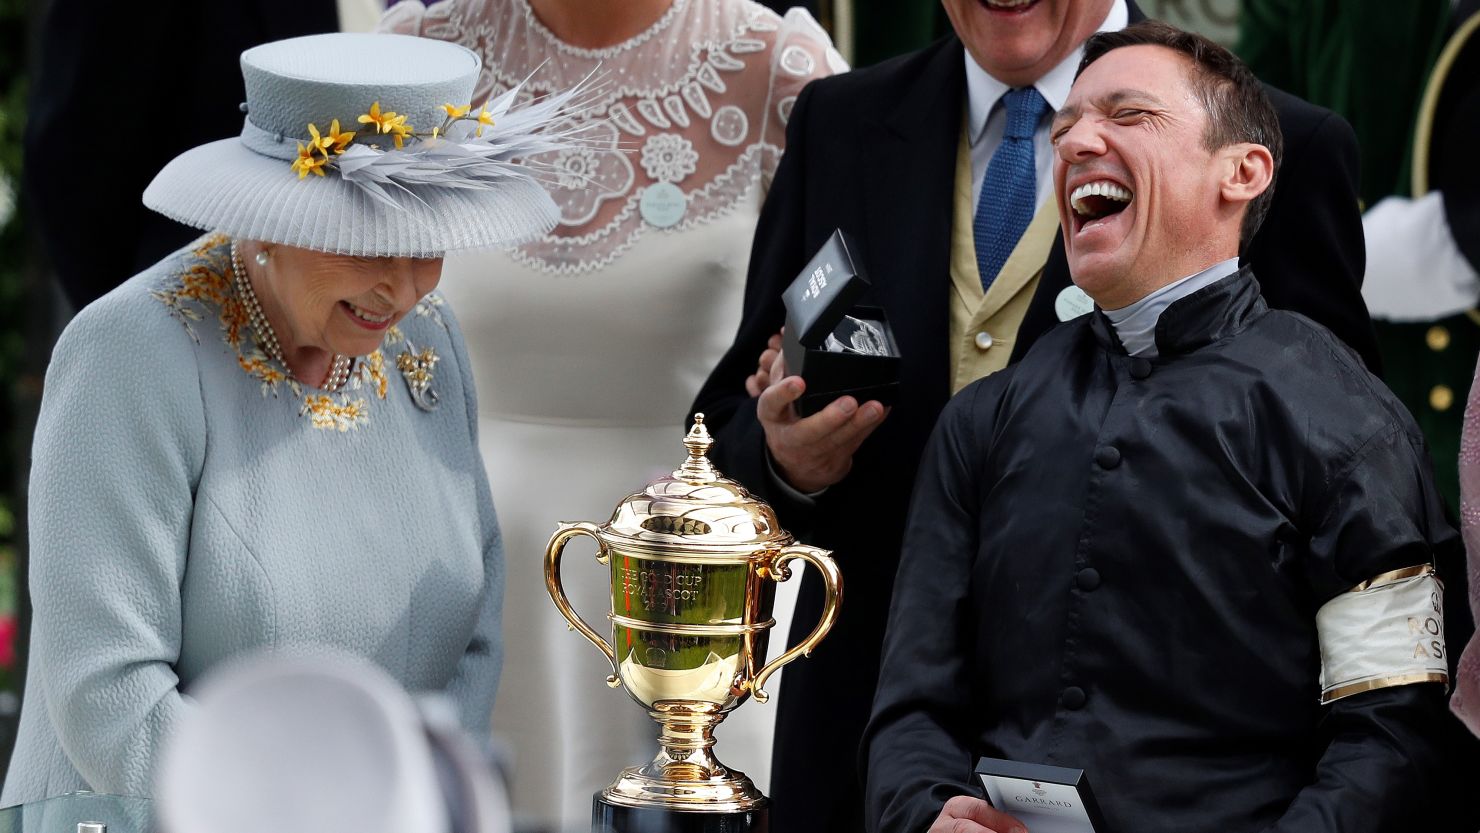 Britain's Queen Elizabeth II presents the Gold Cup to Frankie Dettori on day three at Royal Ascot.